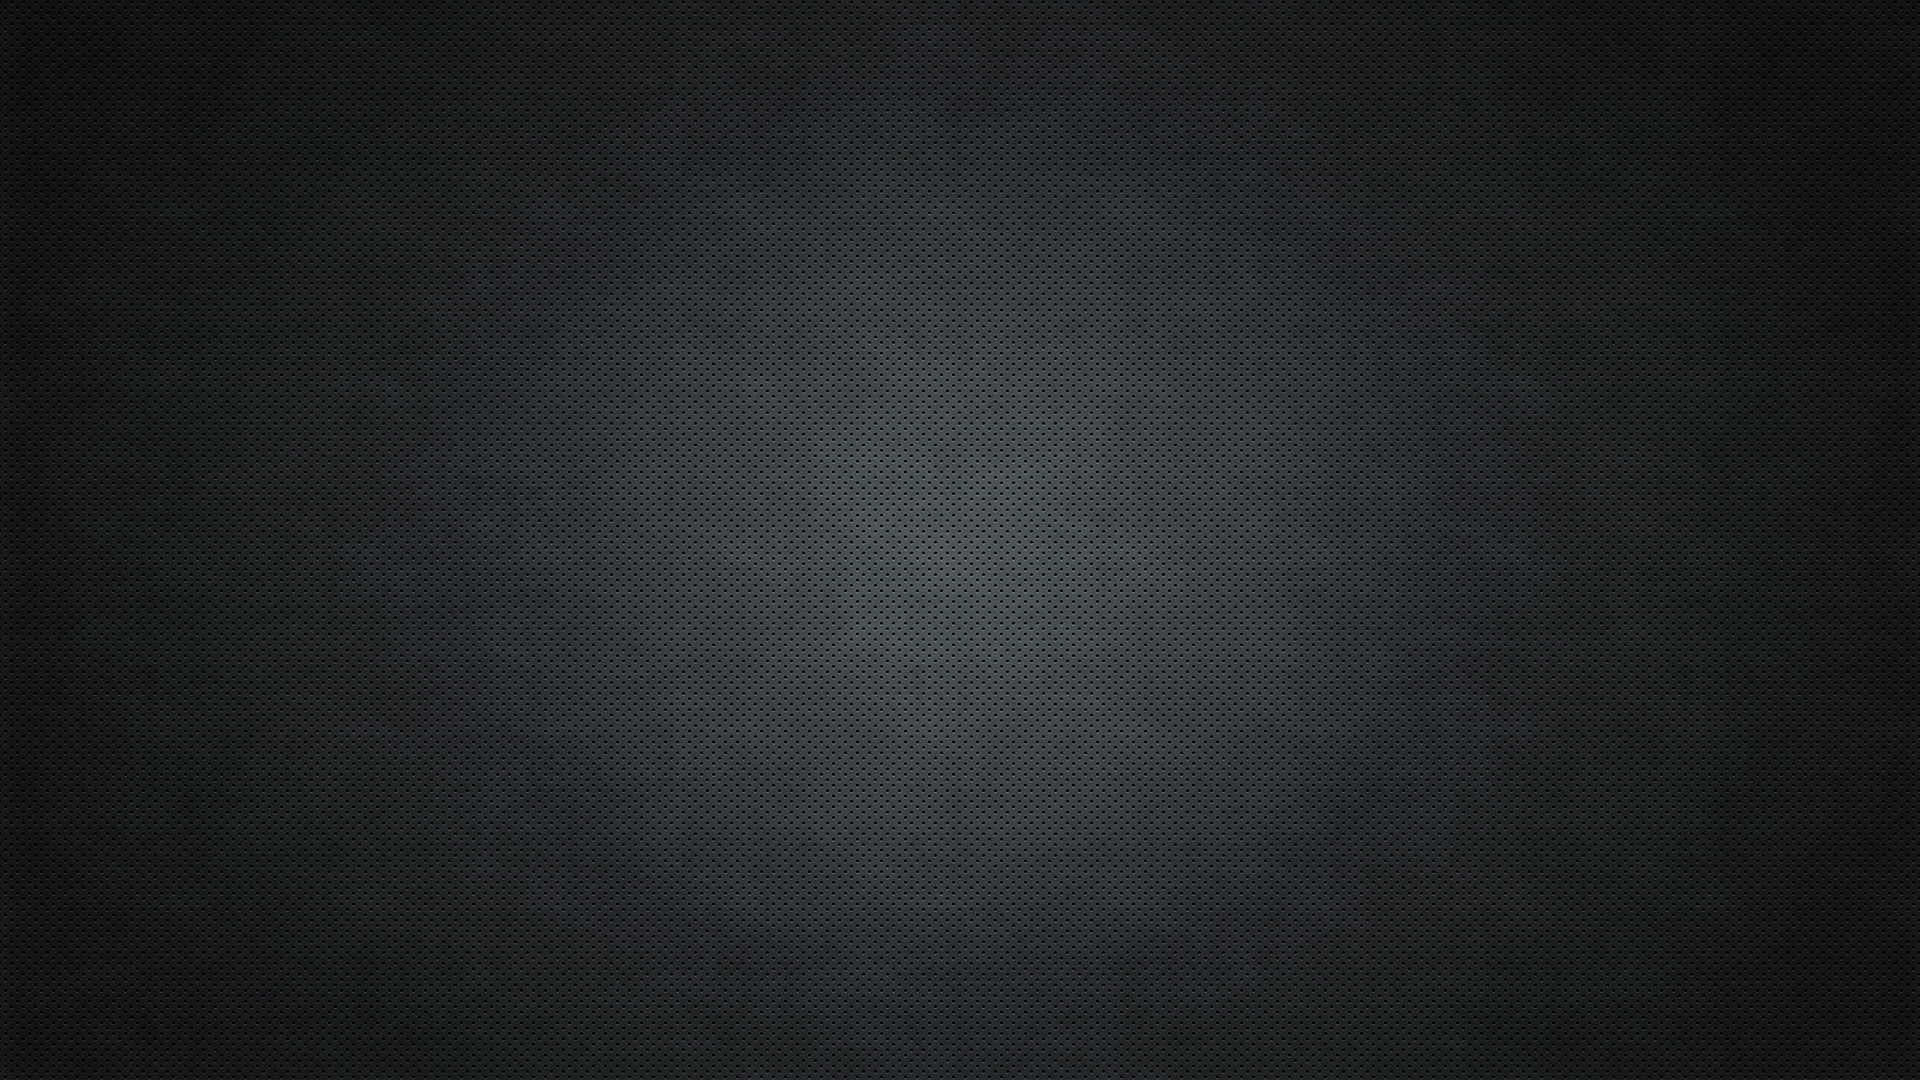 1920x1080 3 Dark Grey HD Wallpapers | Backgrounds - Wallpaper Abyss